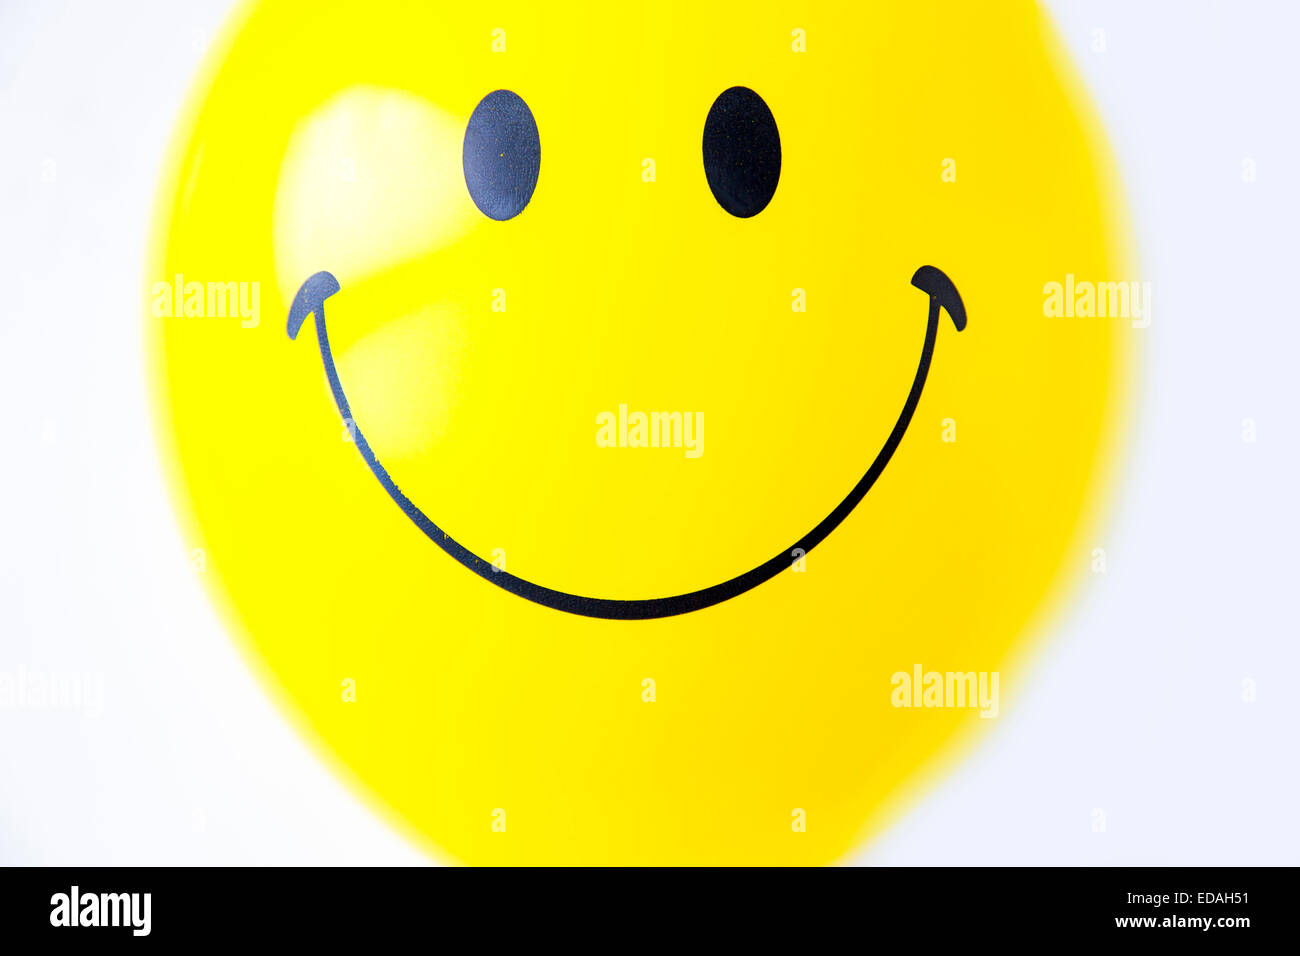 Balloon, yellow, with friendly smiley face Stock Photo